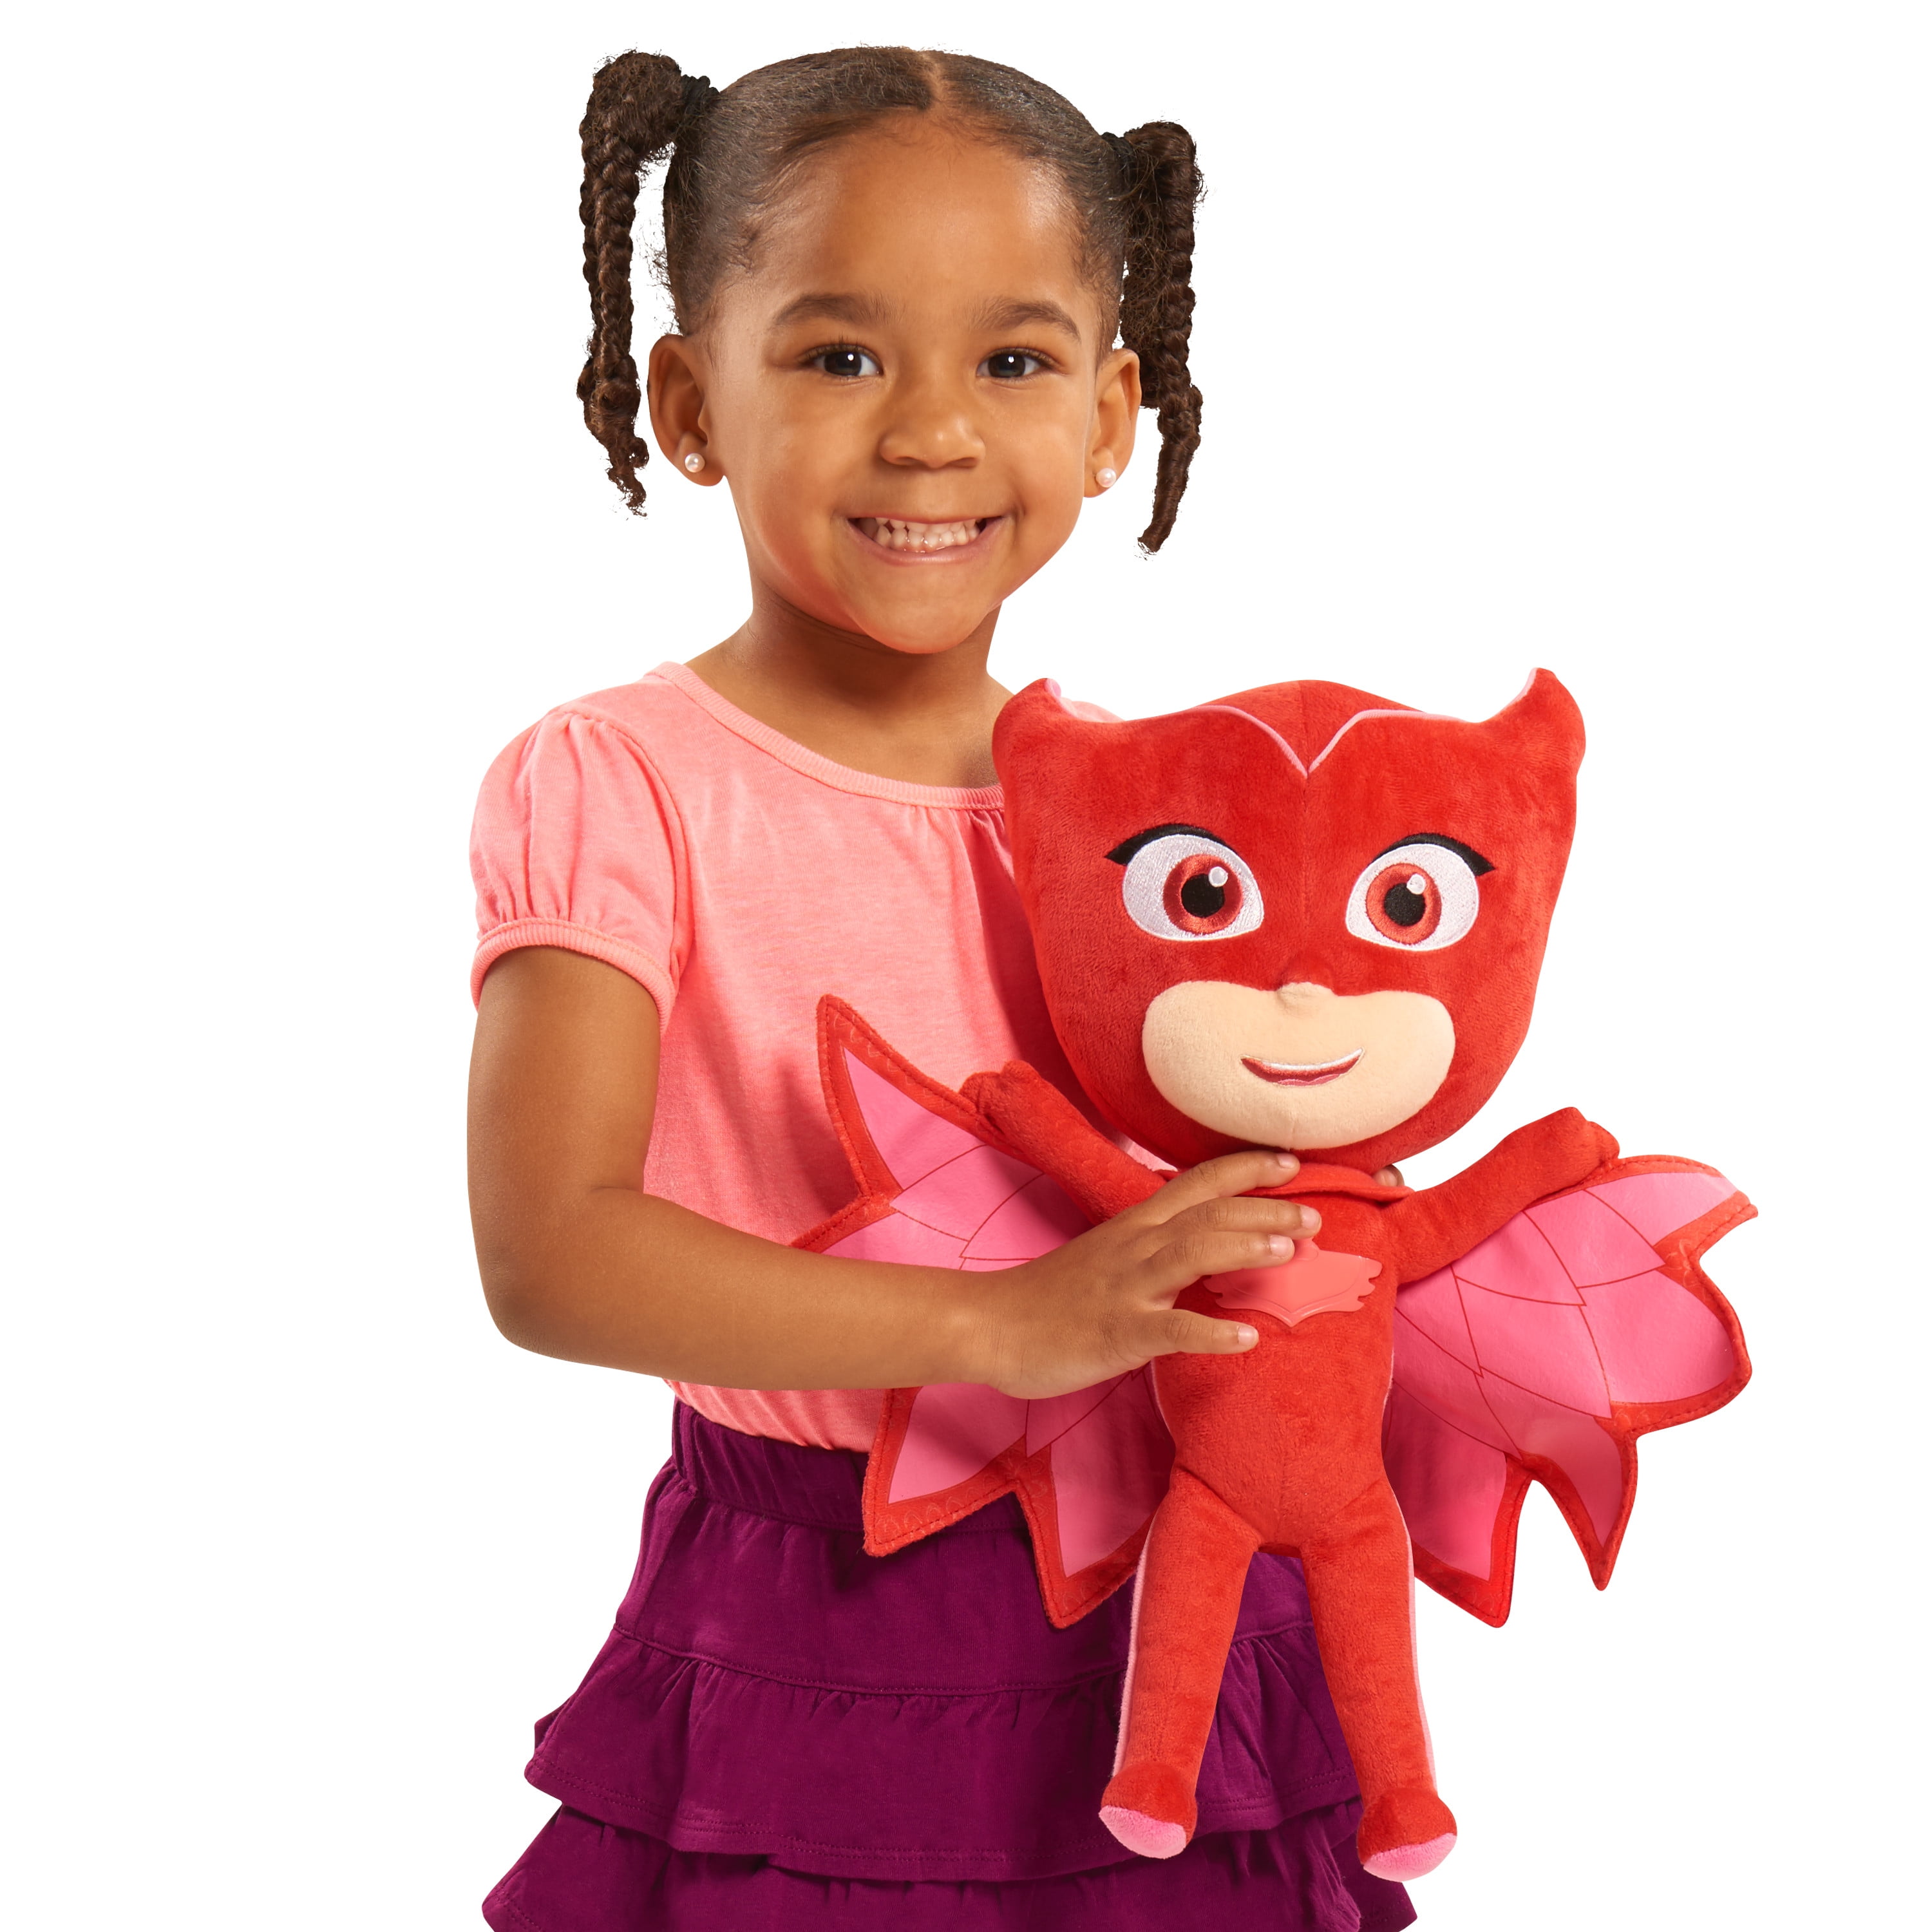 PJ Masks Sing & Talking Feature Plush, Owlette, Kids Toys for Ages 3 Up,  Gifts and Presents